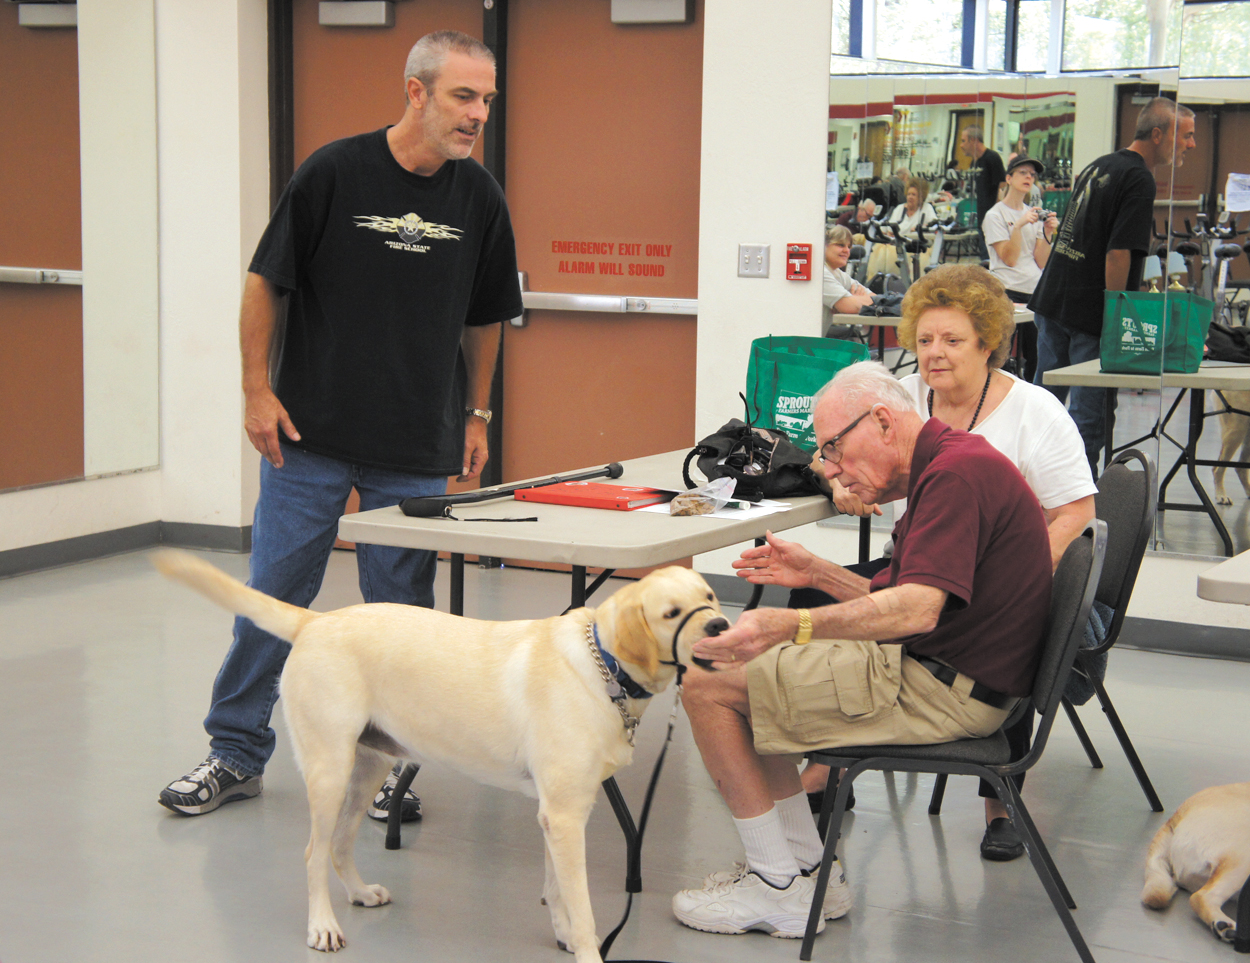 Jake Willison, left, an instructor with Happy Tails Service Dogs, watches as student Robert Westfall commands his 3-year-old yellow Labrador retriever, Molly, to “touch” his hand, while Robert’s wife, Dorothy, looks on. The “touch” command can be used to teach a dog to do everything from turning on a touch lamp to pushing open a door (photo by Teri Carnicelli).